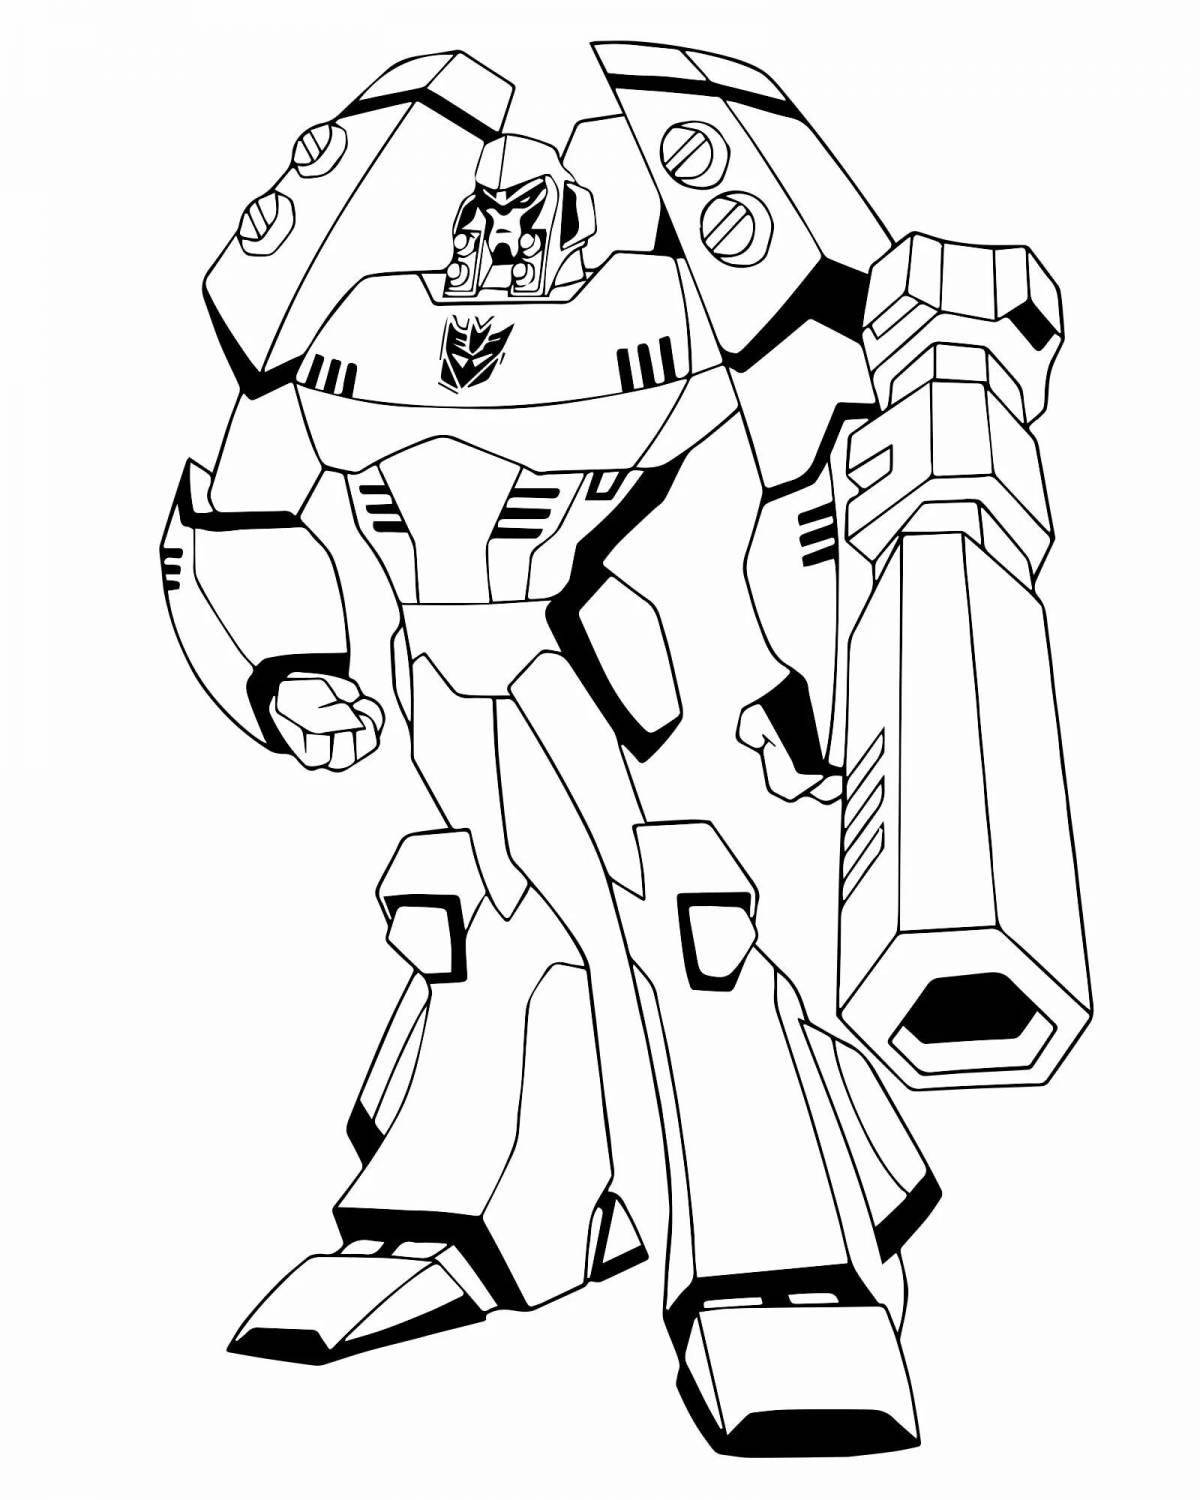 Creative transformers coloring pages for 6-7 year olds